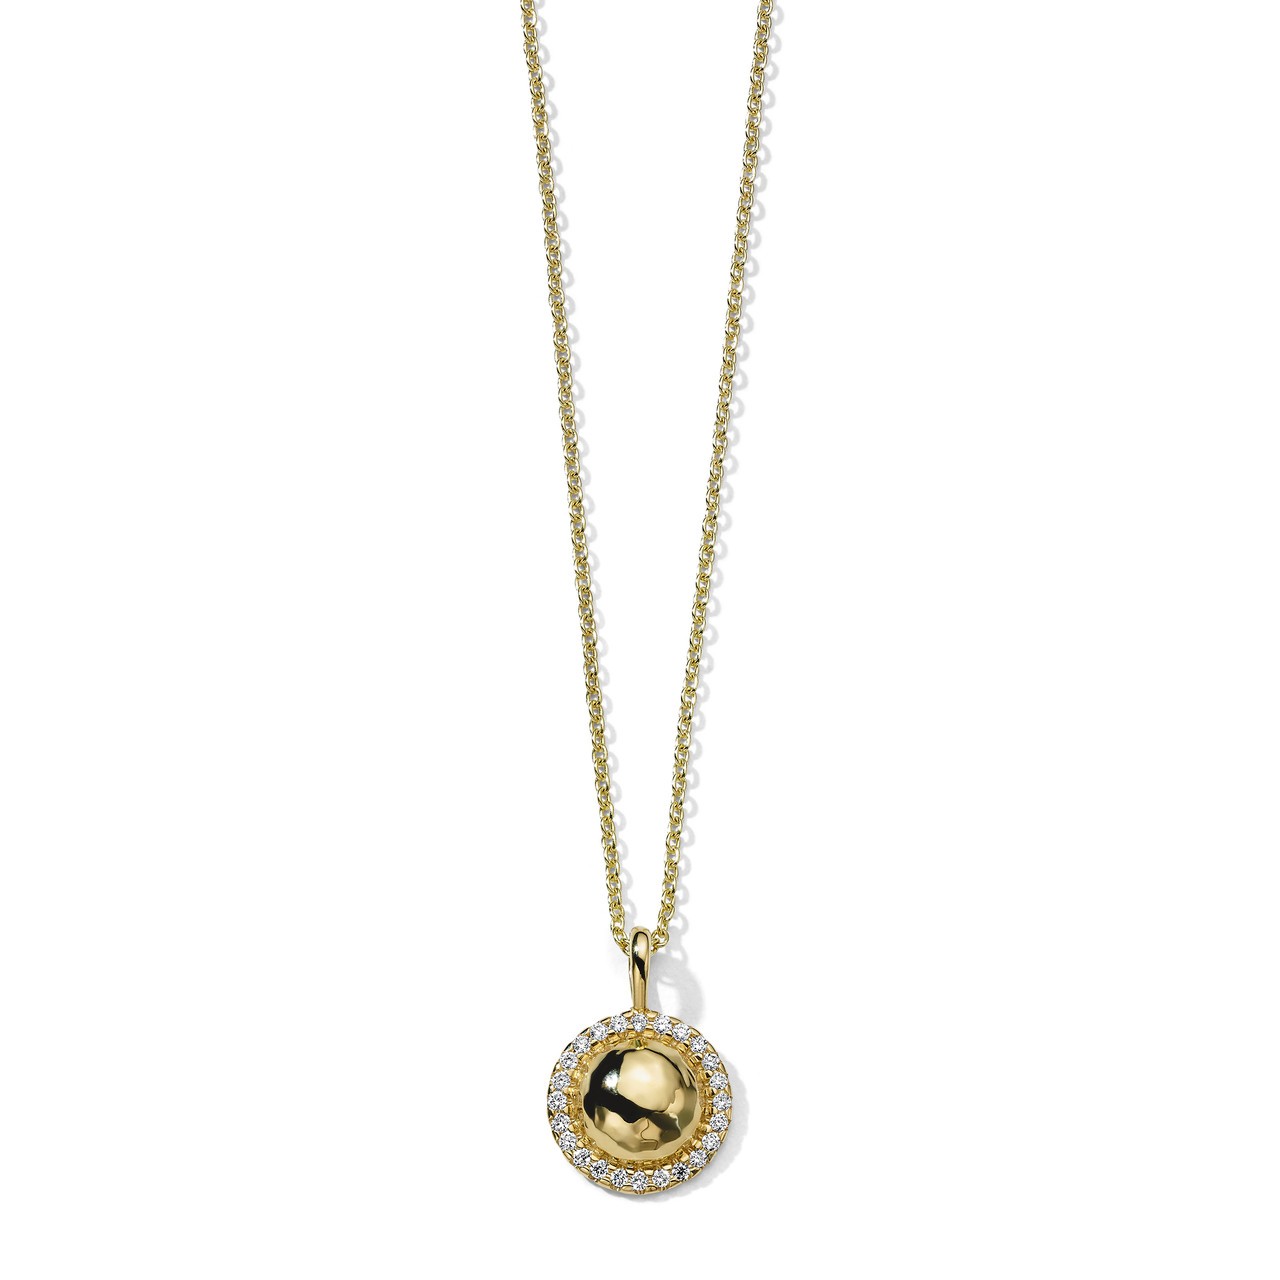 Mini Goddess Necklace in 18K Gold with Diamonds